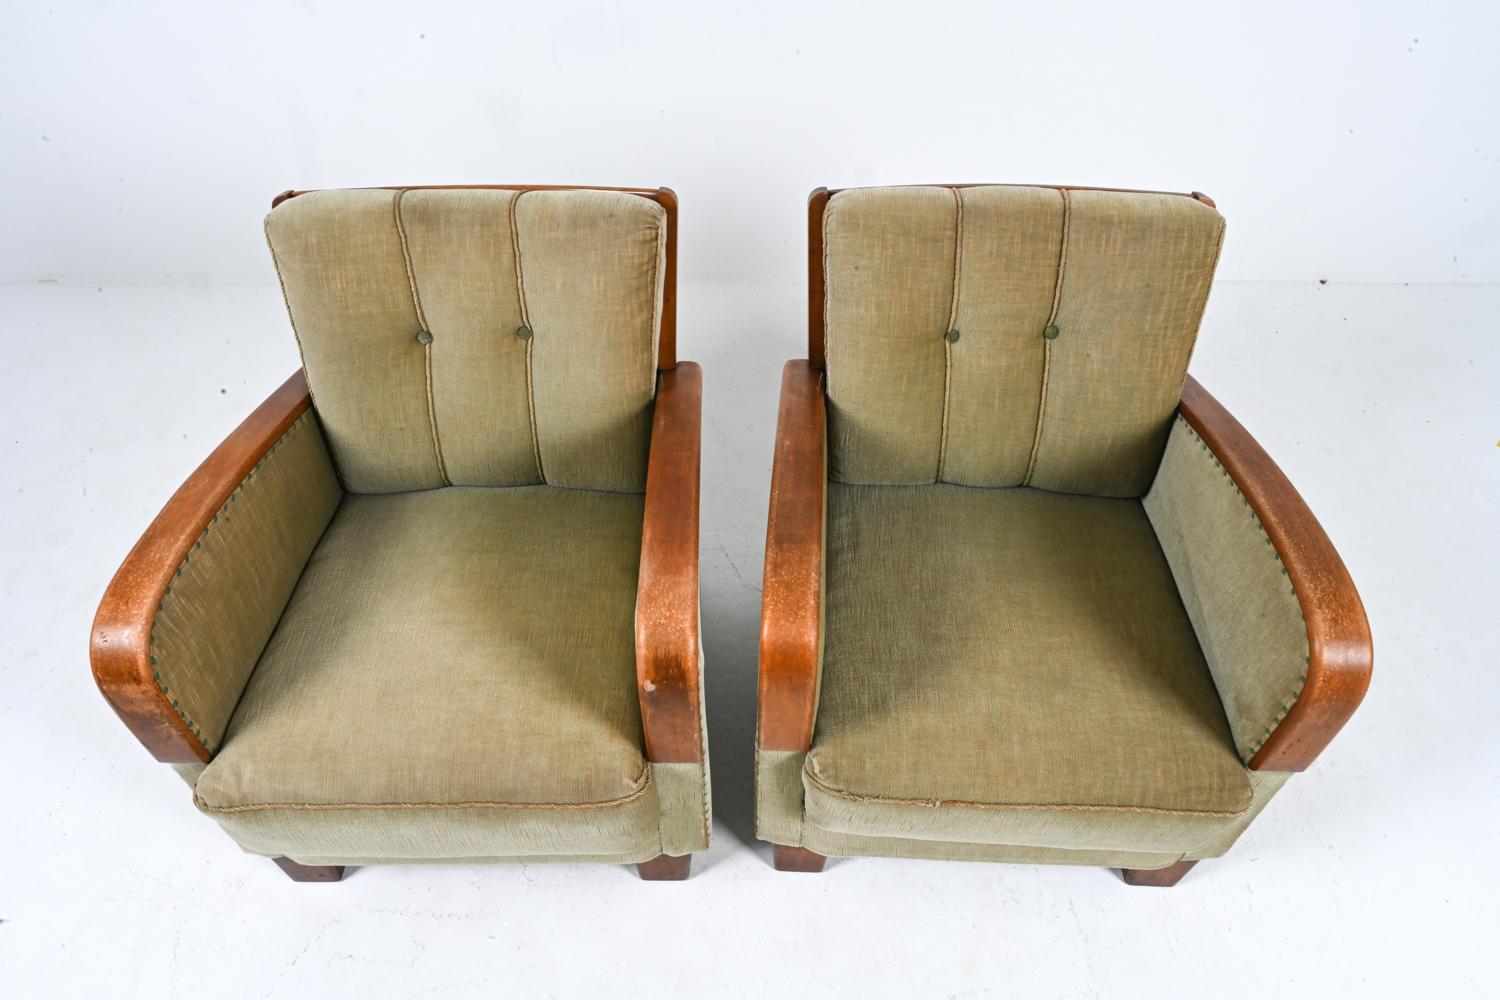 Pair of German Art Deco Oak Easy Chairs, c. 1940's For Sale 1